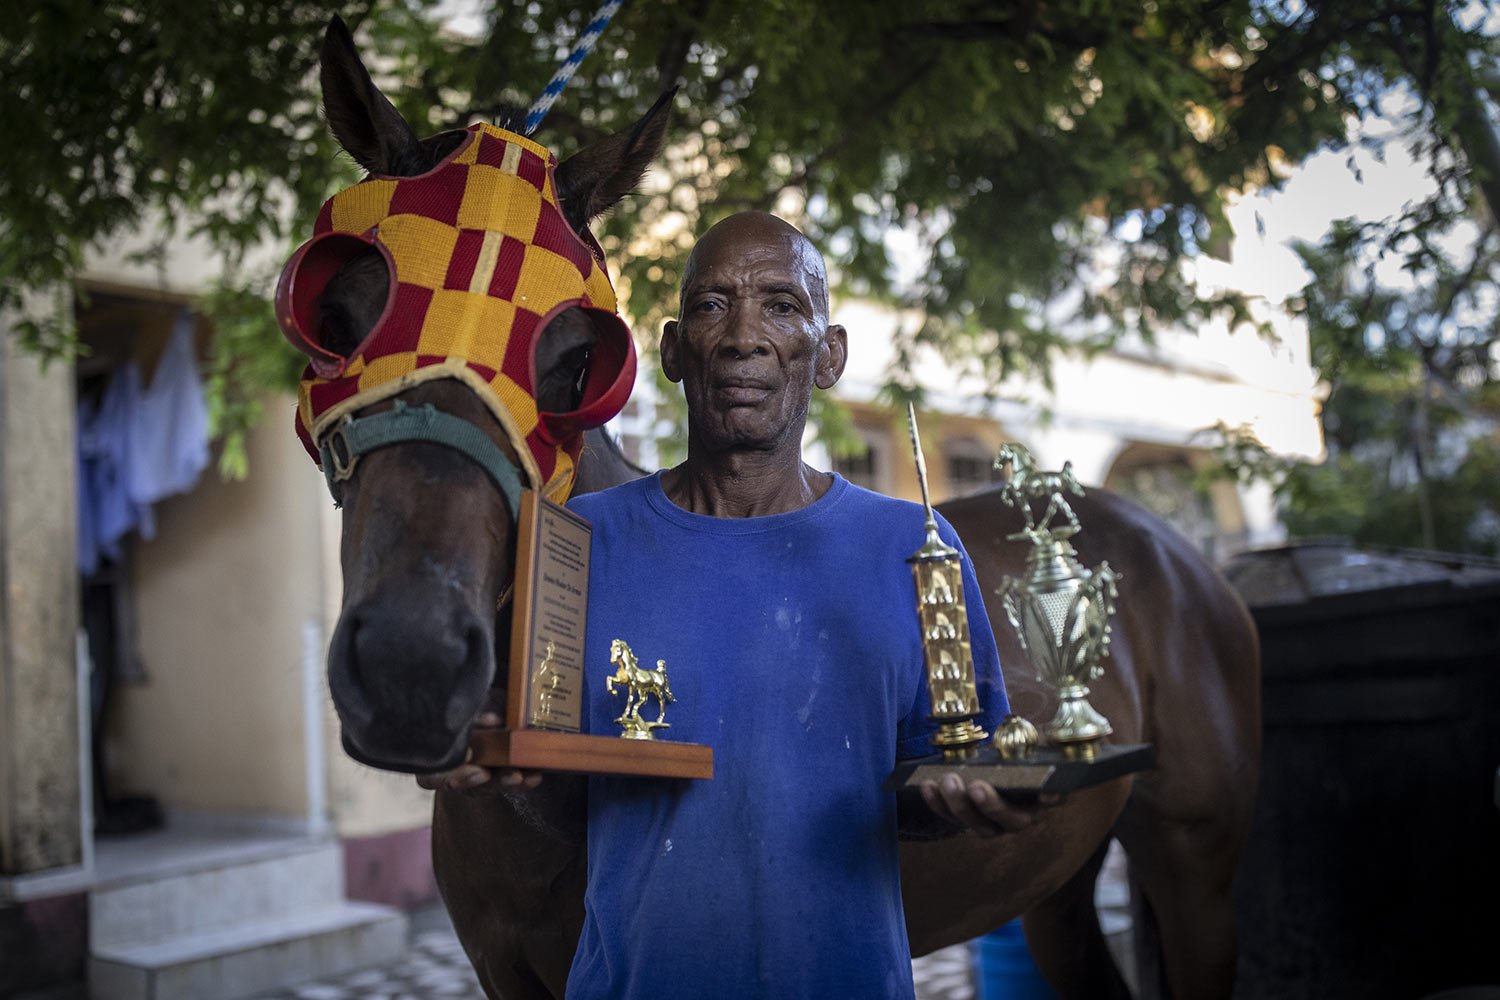  Horse trainer Denis Hooker poses with his horse Pereque and Pereque's winning trophies on San Andres Island in Colombia, Friday, Nov. 11, 2022. (AP Photo/Ivan Valencia) 